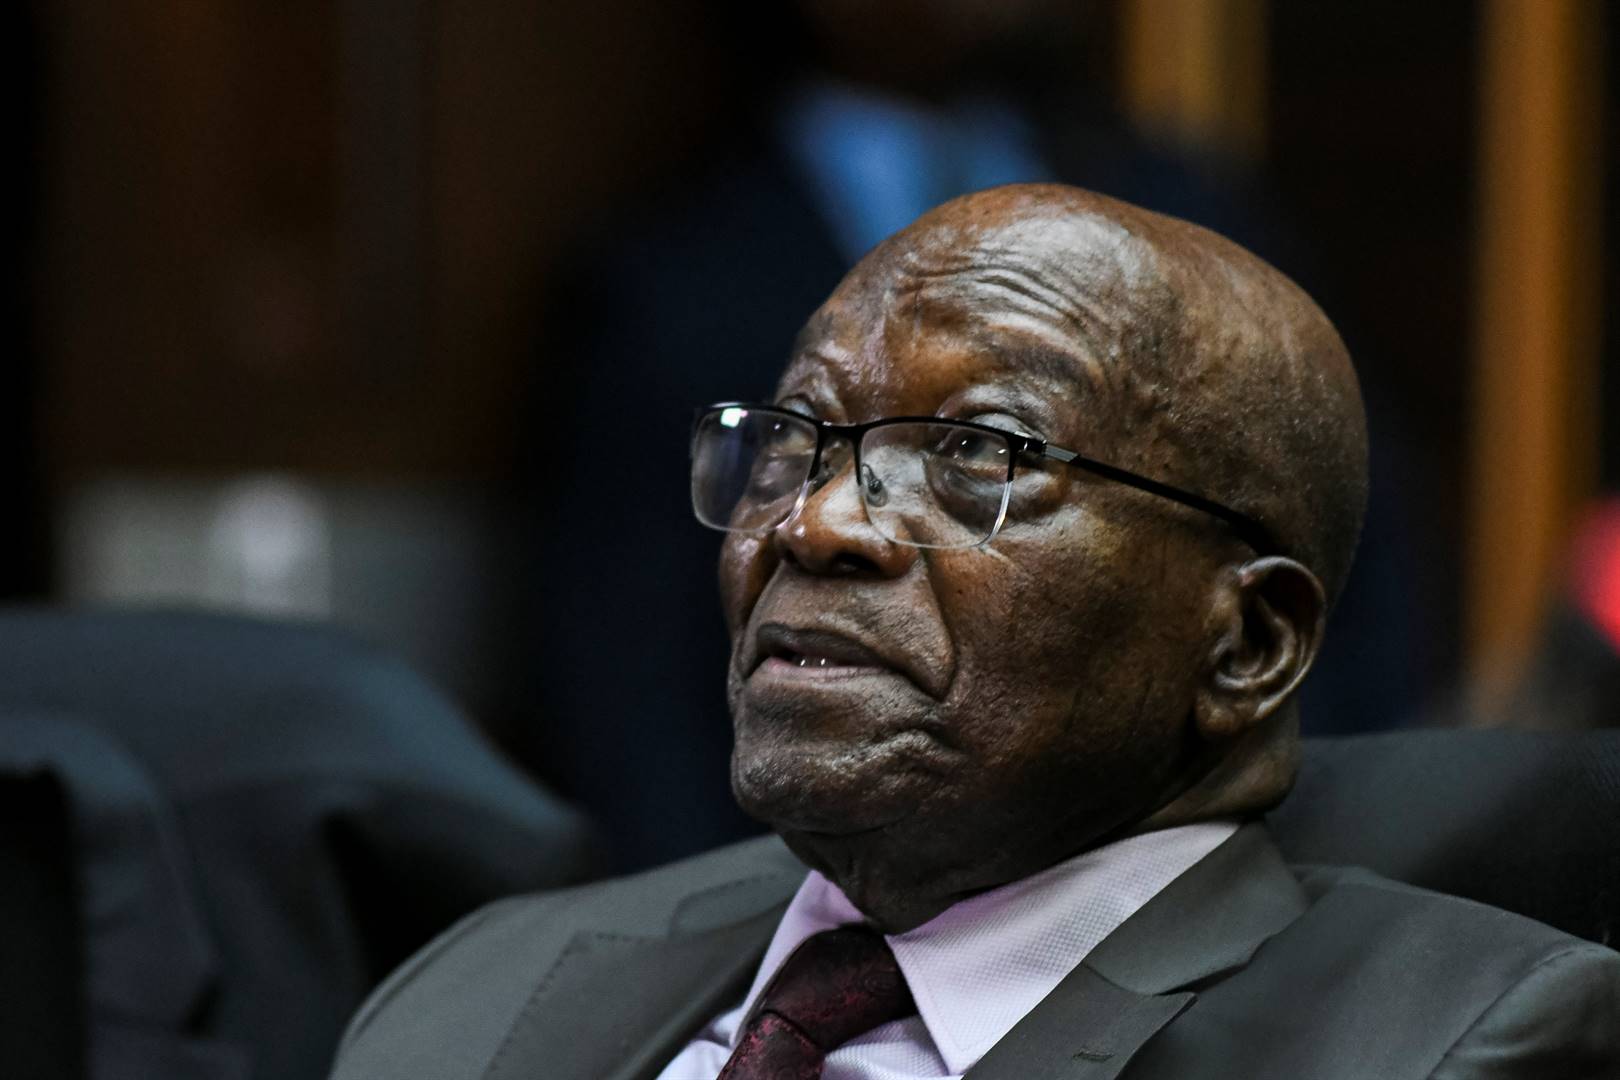 News24 | EXCLUSIVE | Solicitor-General says legal fees claim against Zuma has doubled, vows Myeni assets will be seized